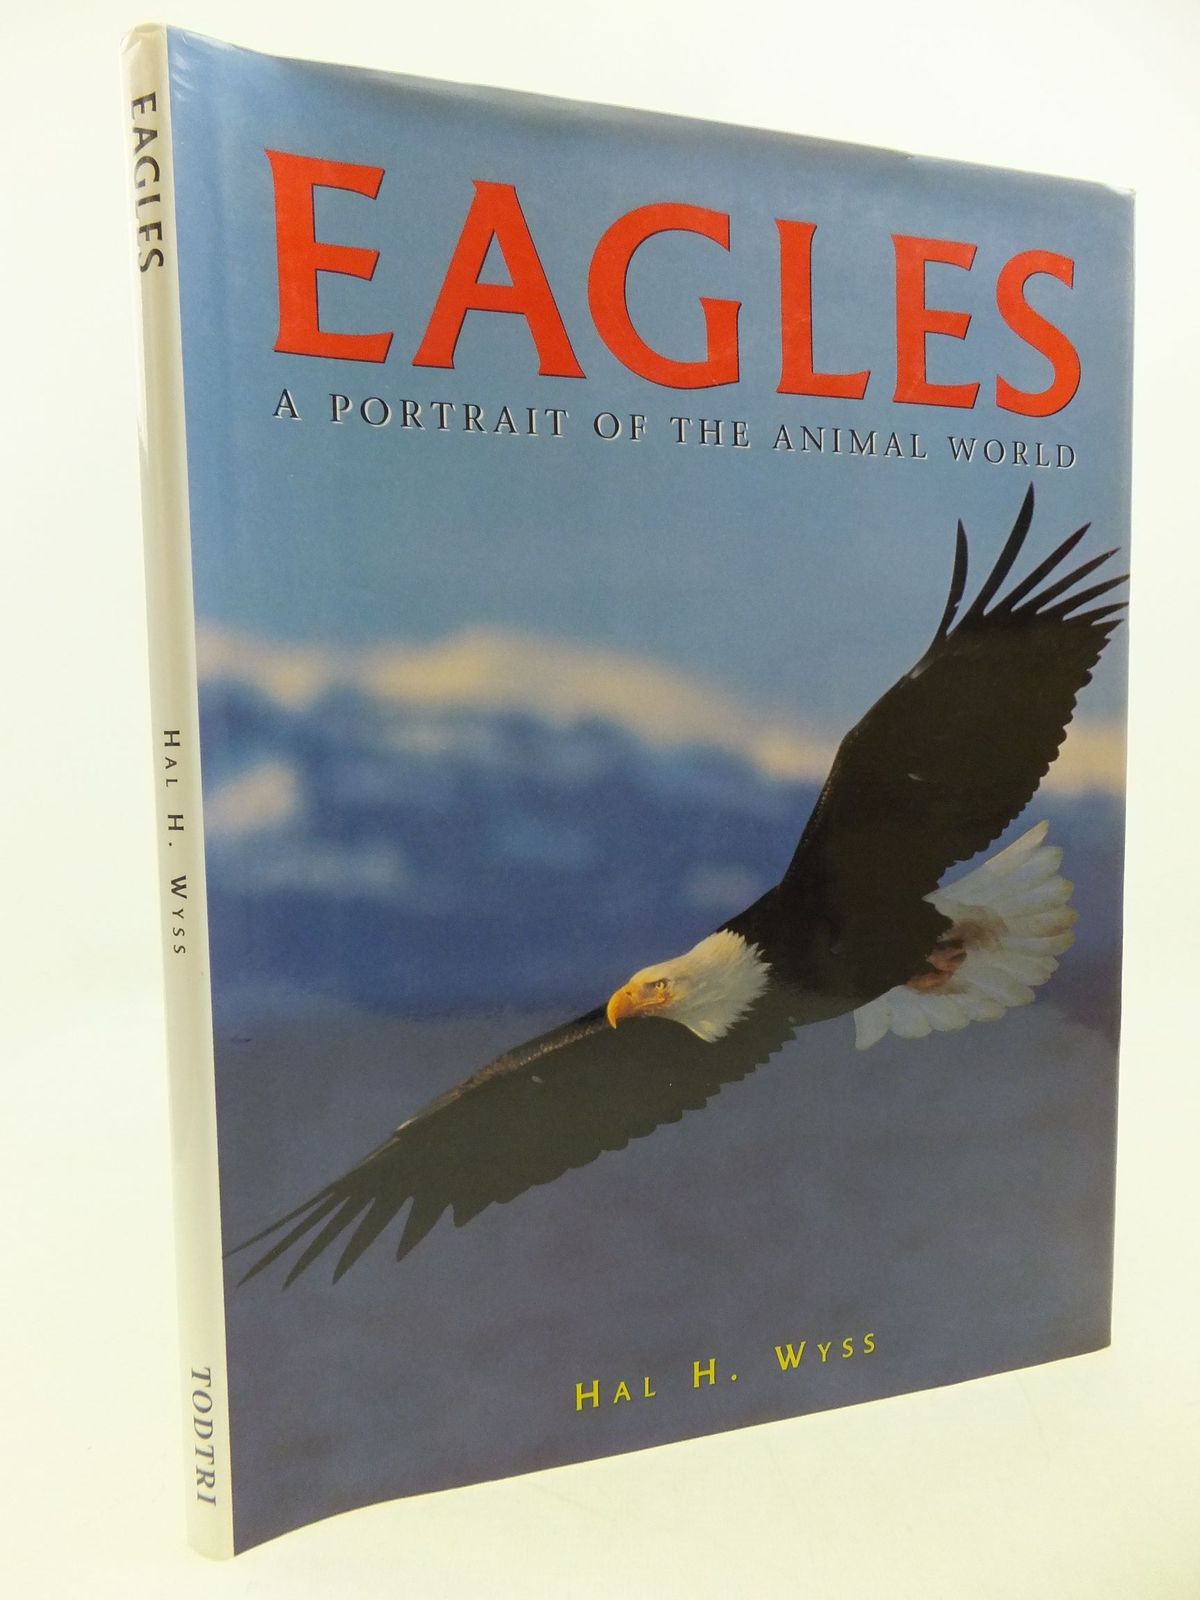 Photo of EAGLES A PORTRAIT OF THE ANIMAL WORLD written by Wyss, Hal H. published by Todtri (STOCK CODE: 1709813)  for sale by Stella & Rose's Books